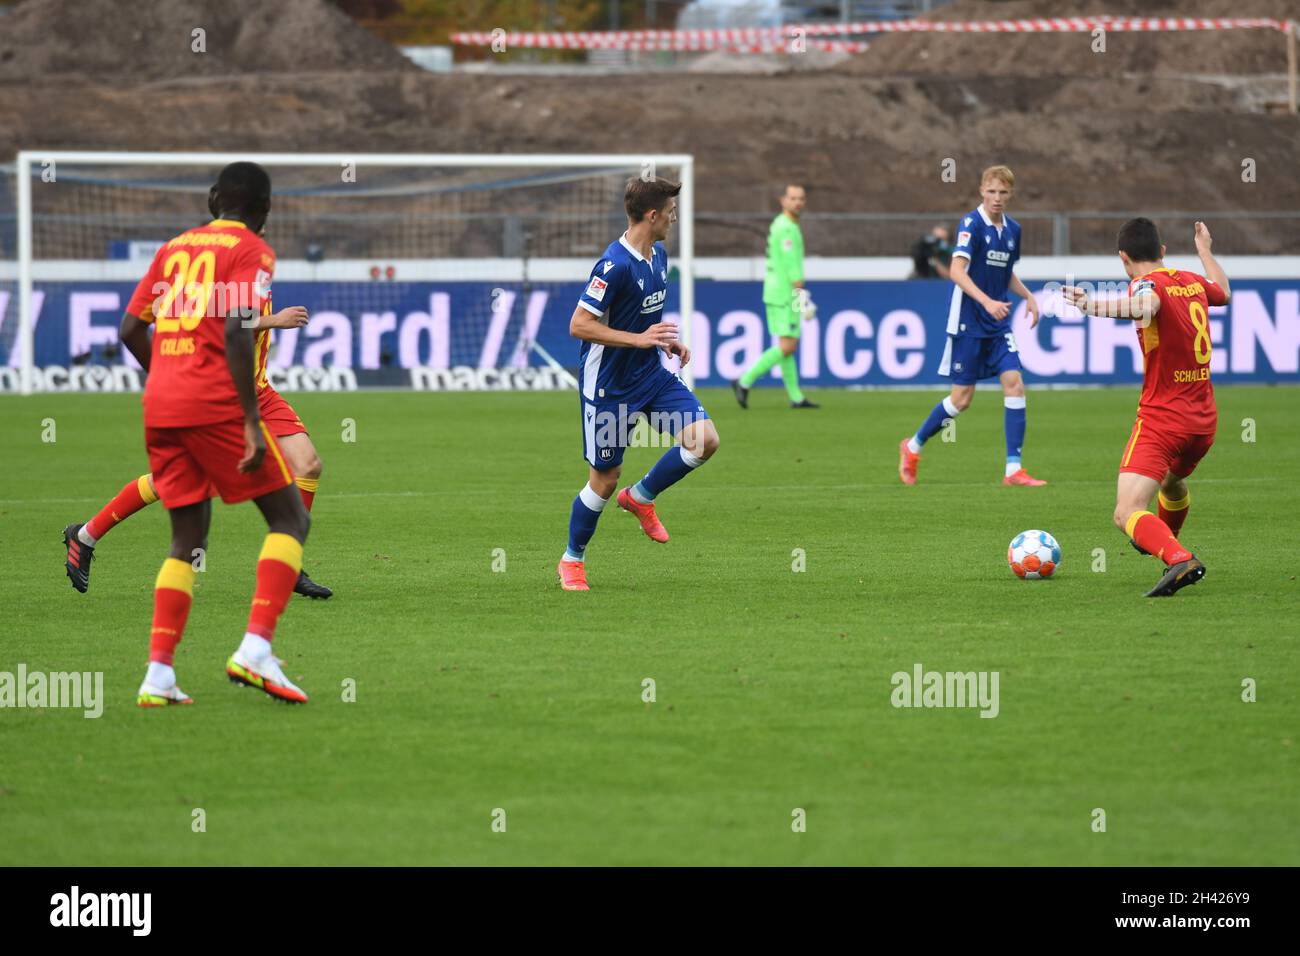 KSC second league match against SC paderborn 2:4 in Wildparkstadion Karlsruhe 31. October 2021 Karlsruher SC Stock Photo